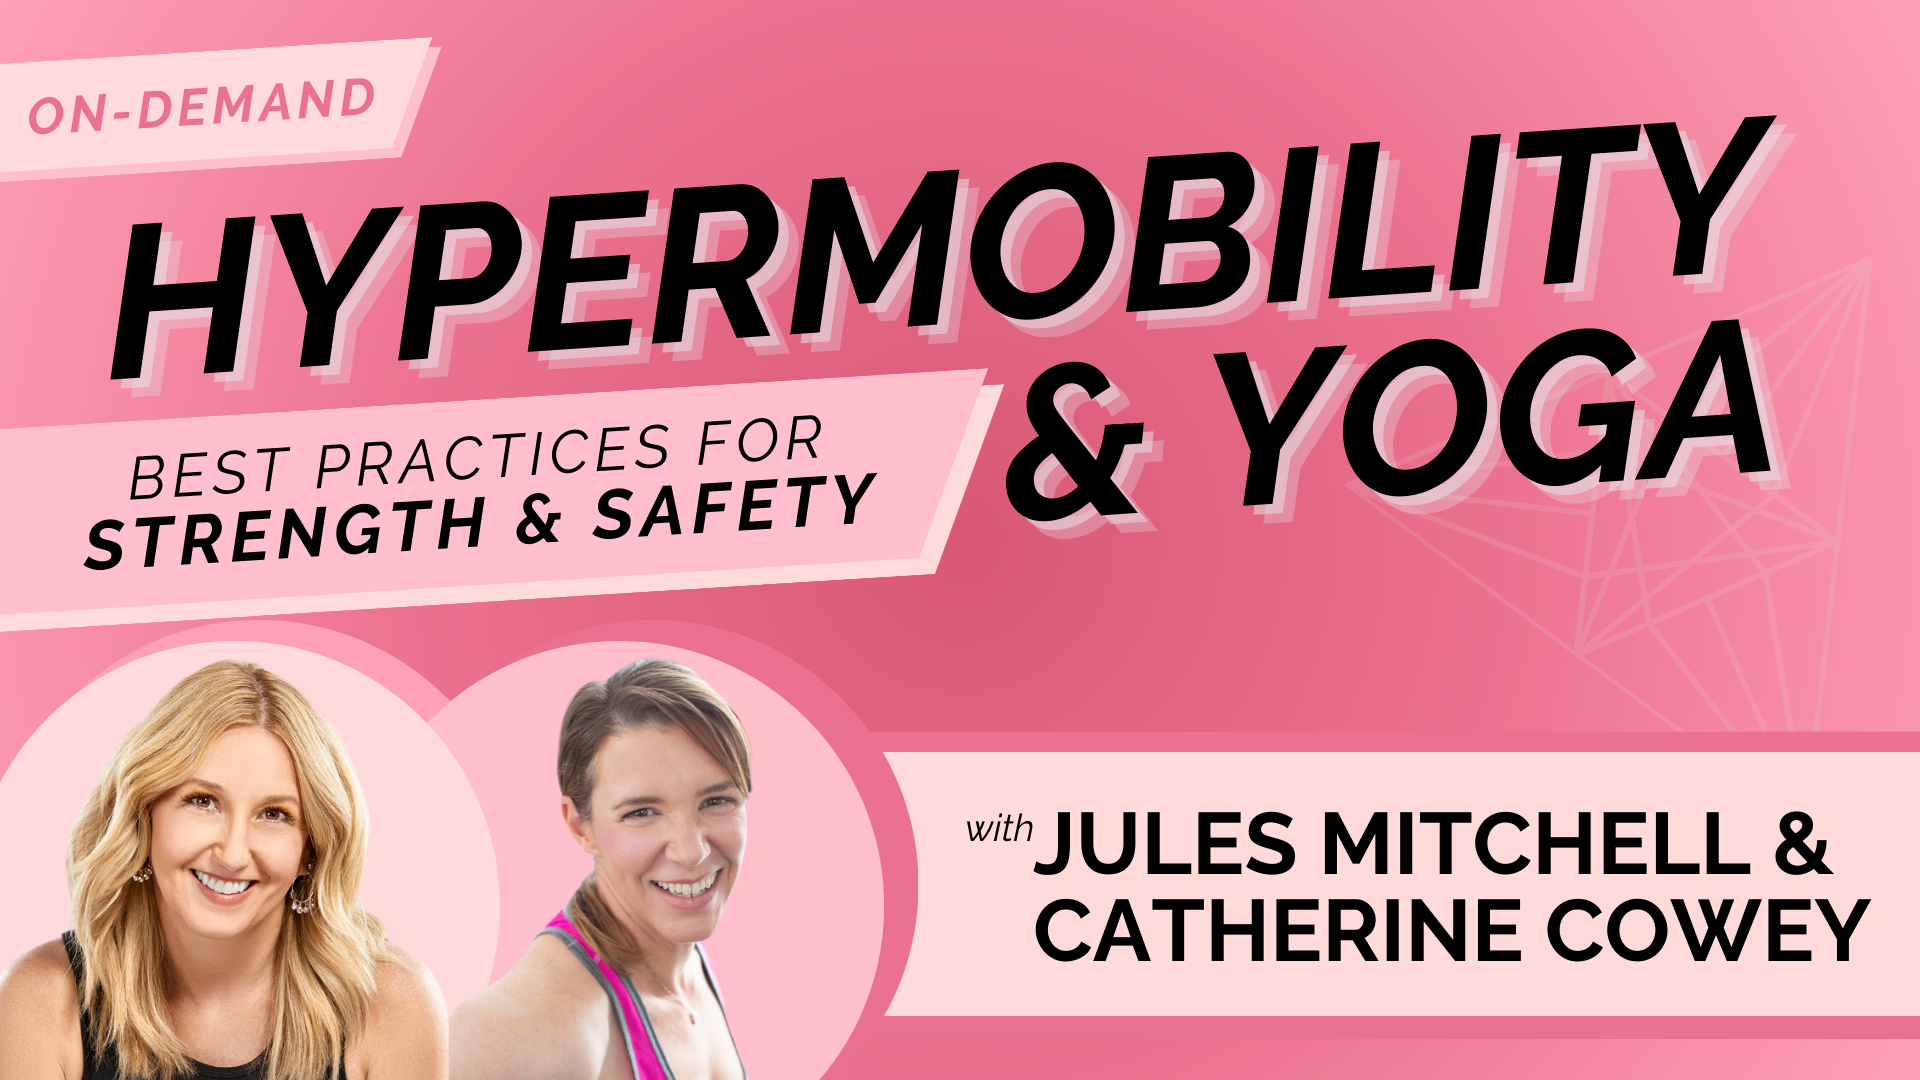 Hypermobility & Yoga: Best Practices for Strength & Safety, with Jules Mitchell & Catherine Cowey